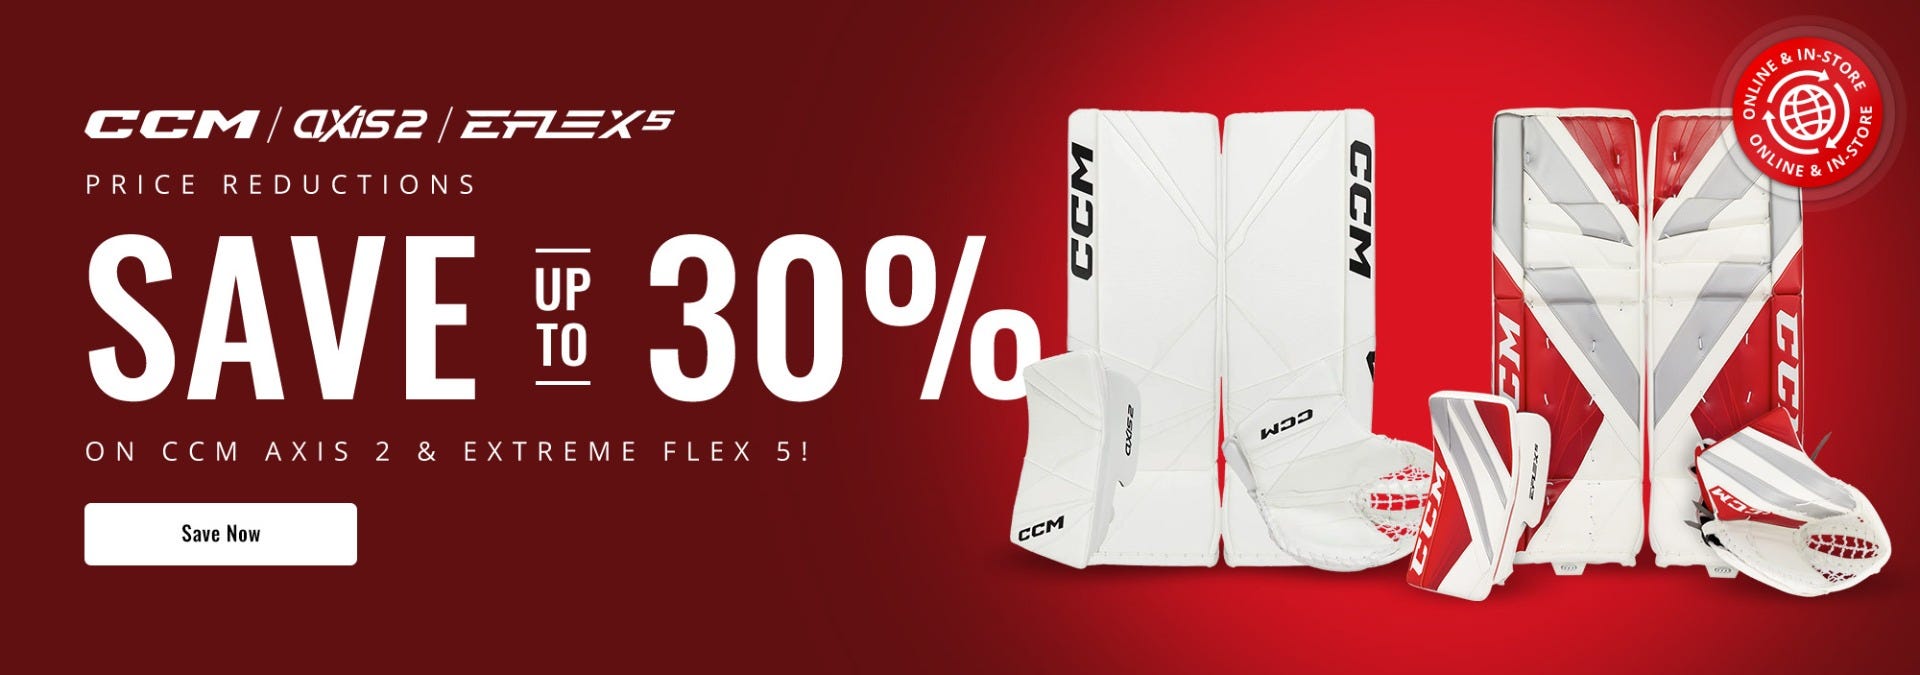 CCM Price Reductions | Save up to 30% on CCM Axis 2 & Extreme Flex 5